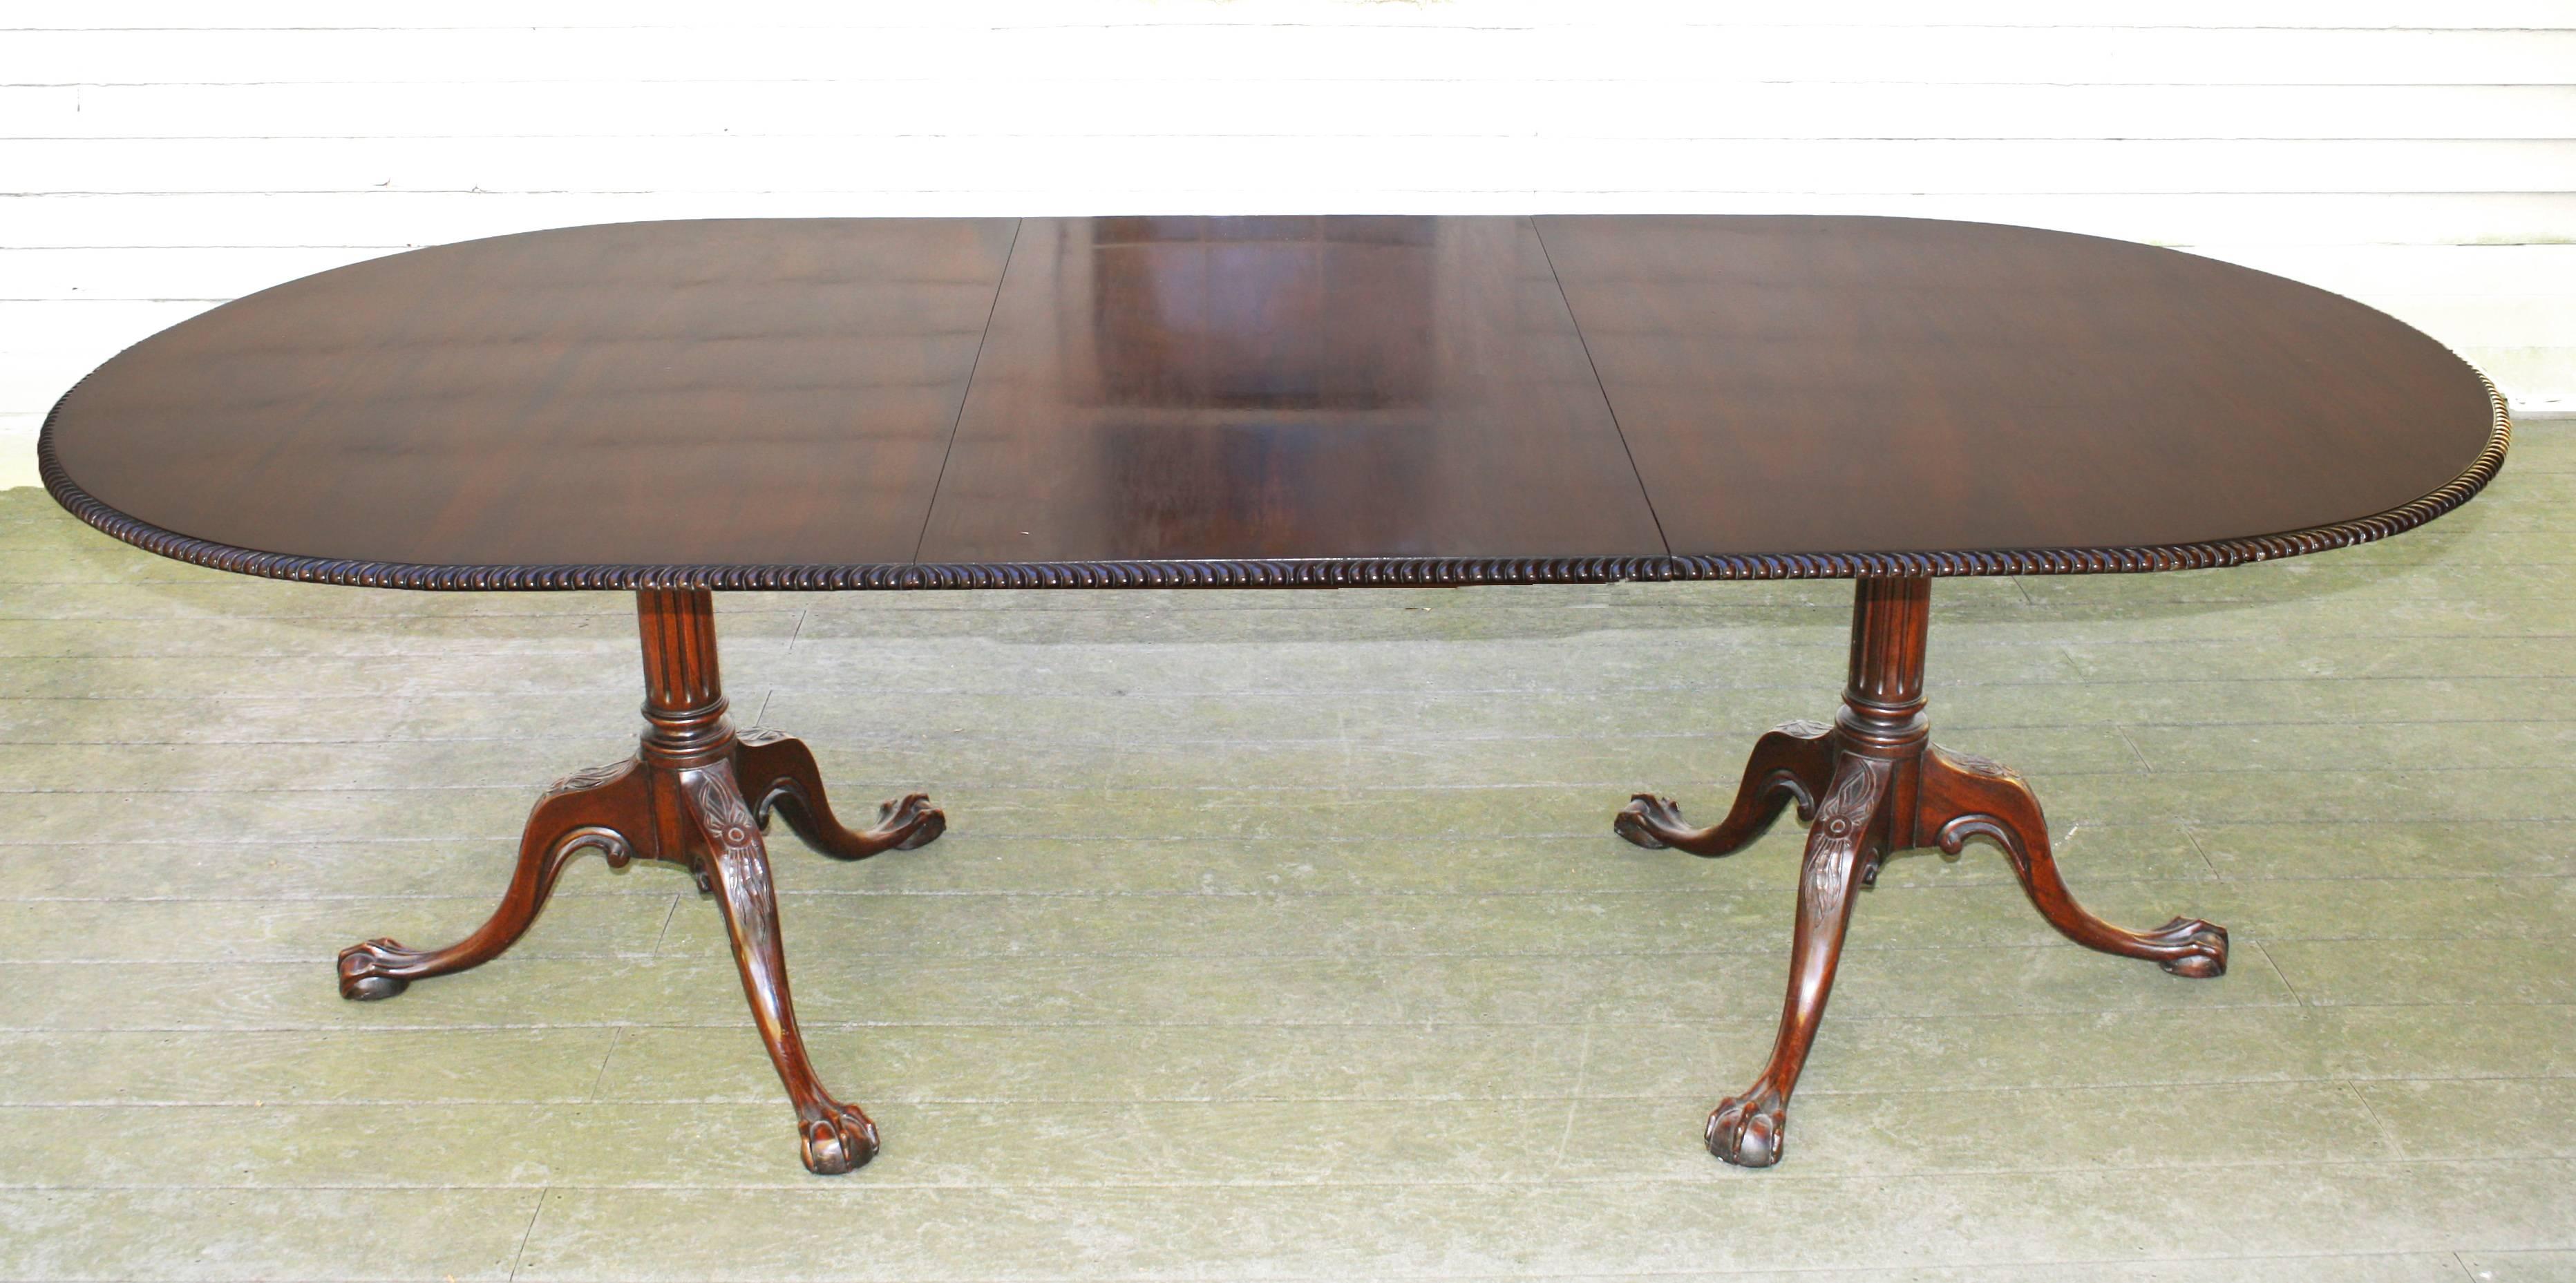 Late 19th century bench-made Chippendale Revival Cuban mahogany double pedestal dining table. With the single 24